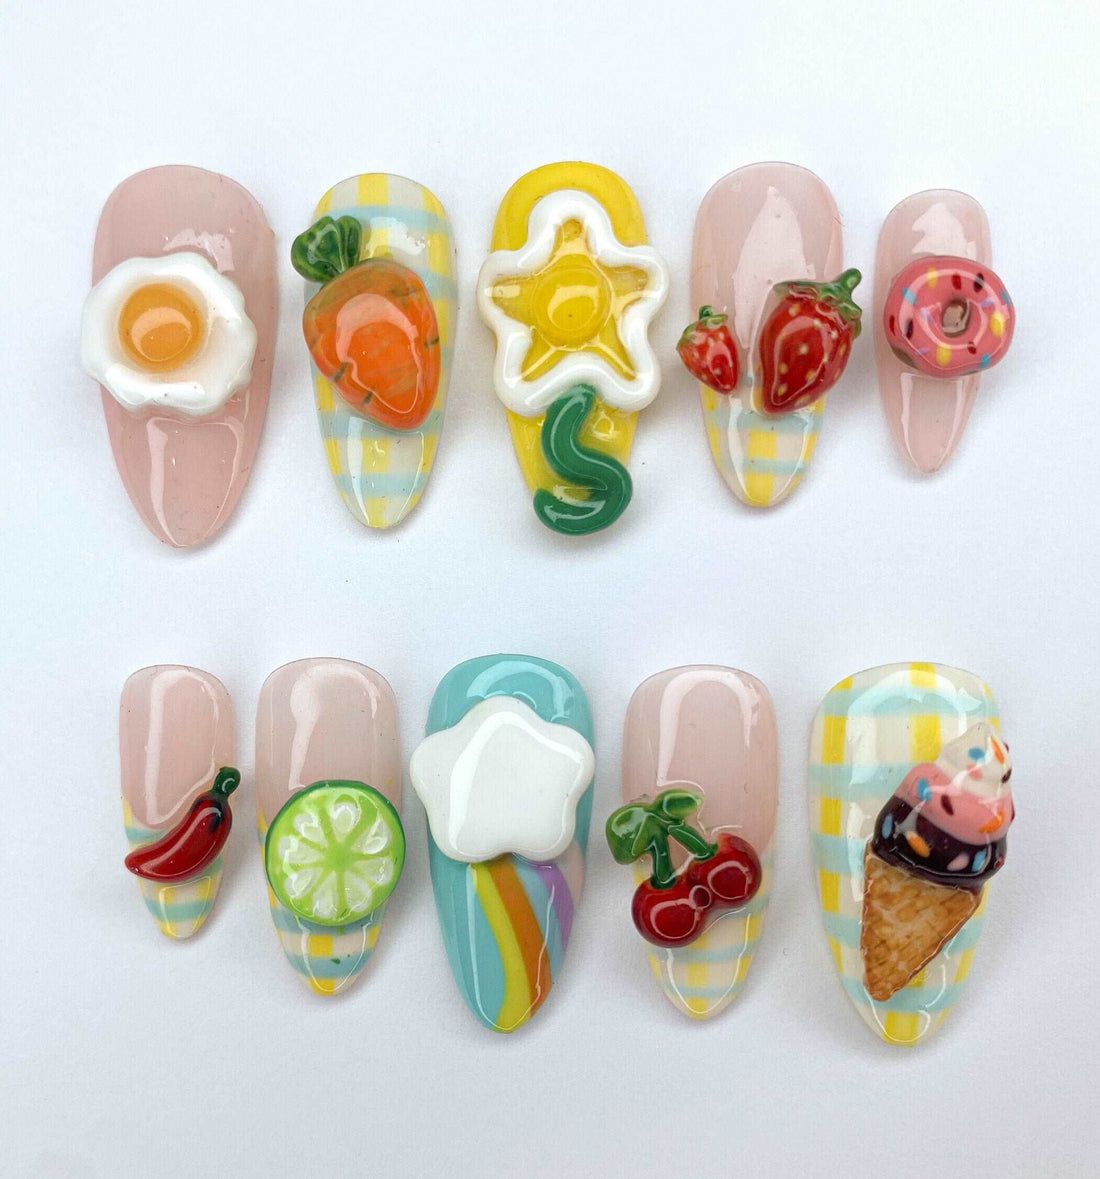 3D Fun Food and Fruit Handmade Press On Nails - Colorful Summer Design